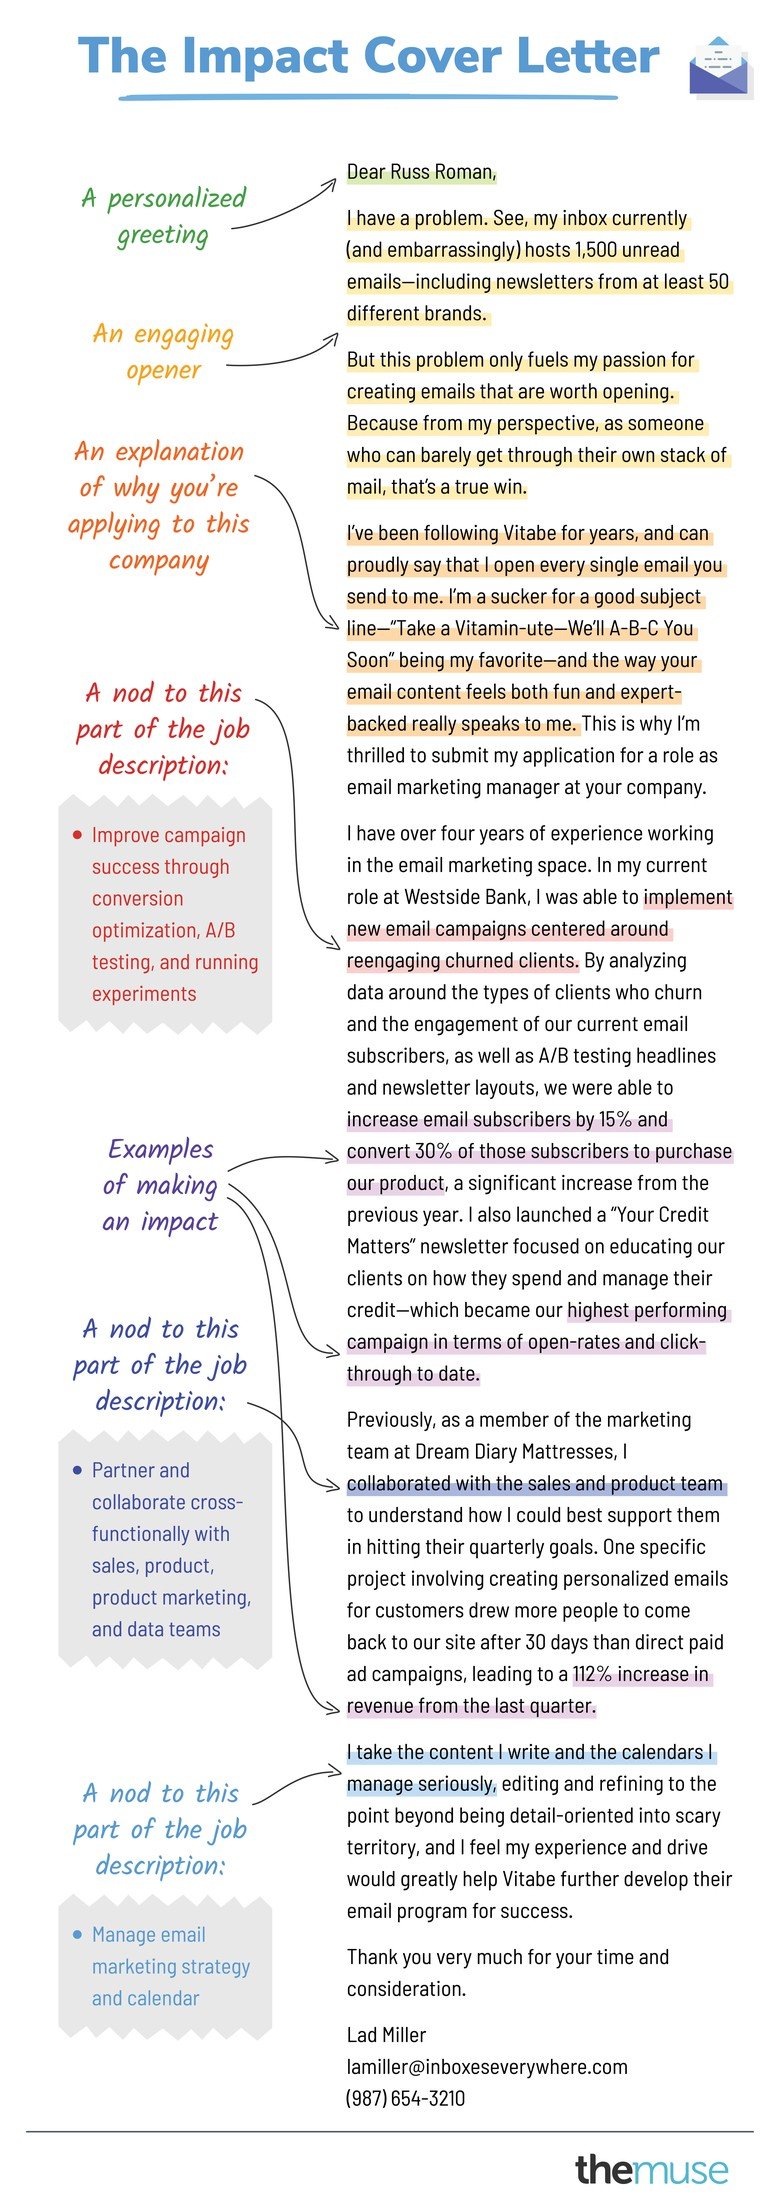 infographic of cover letter example impact cover letter